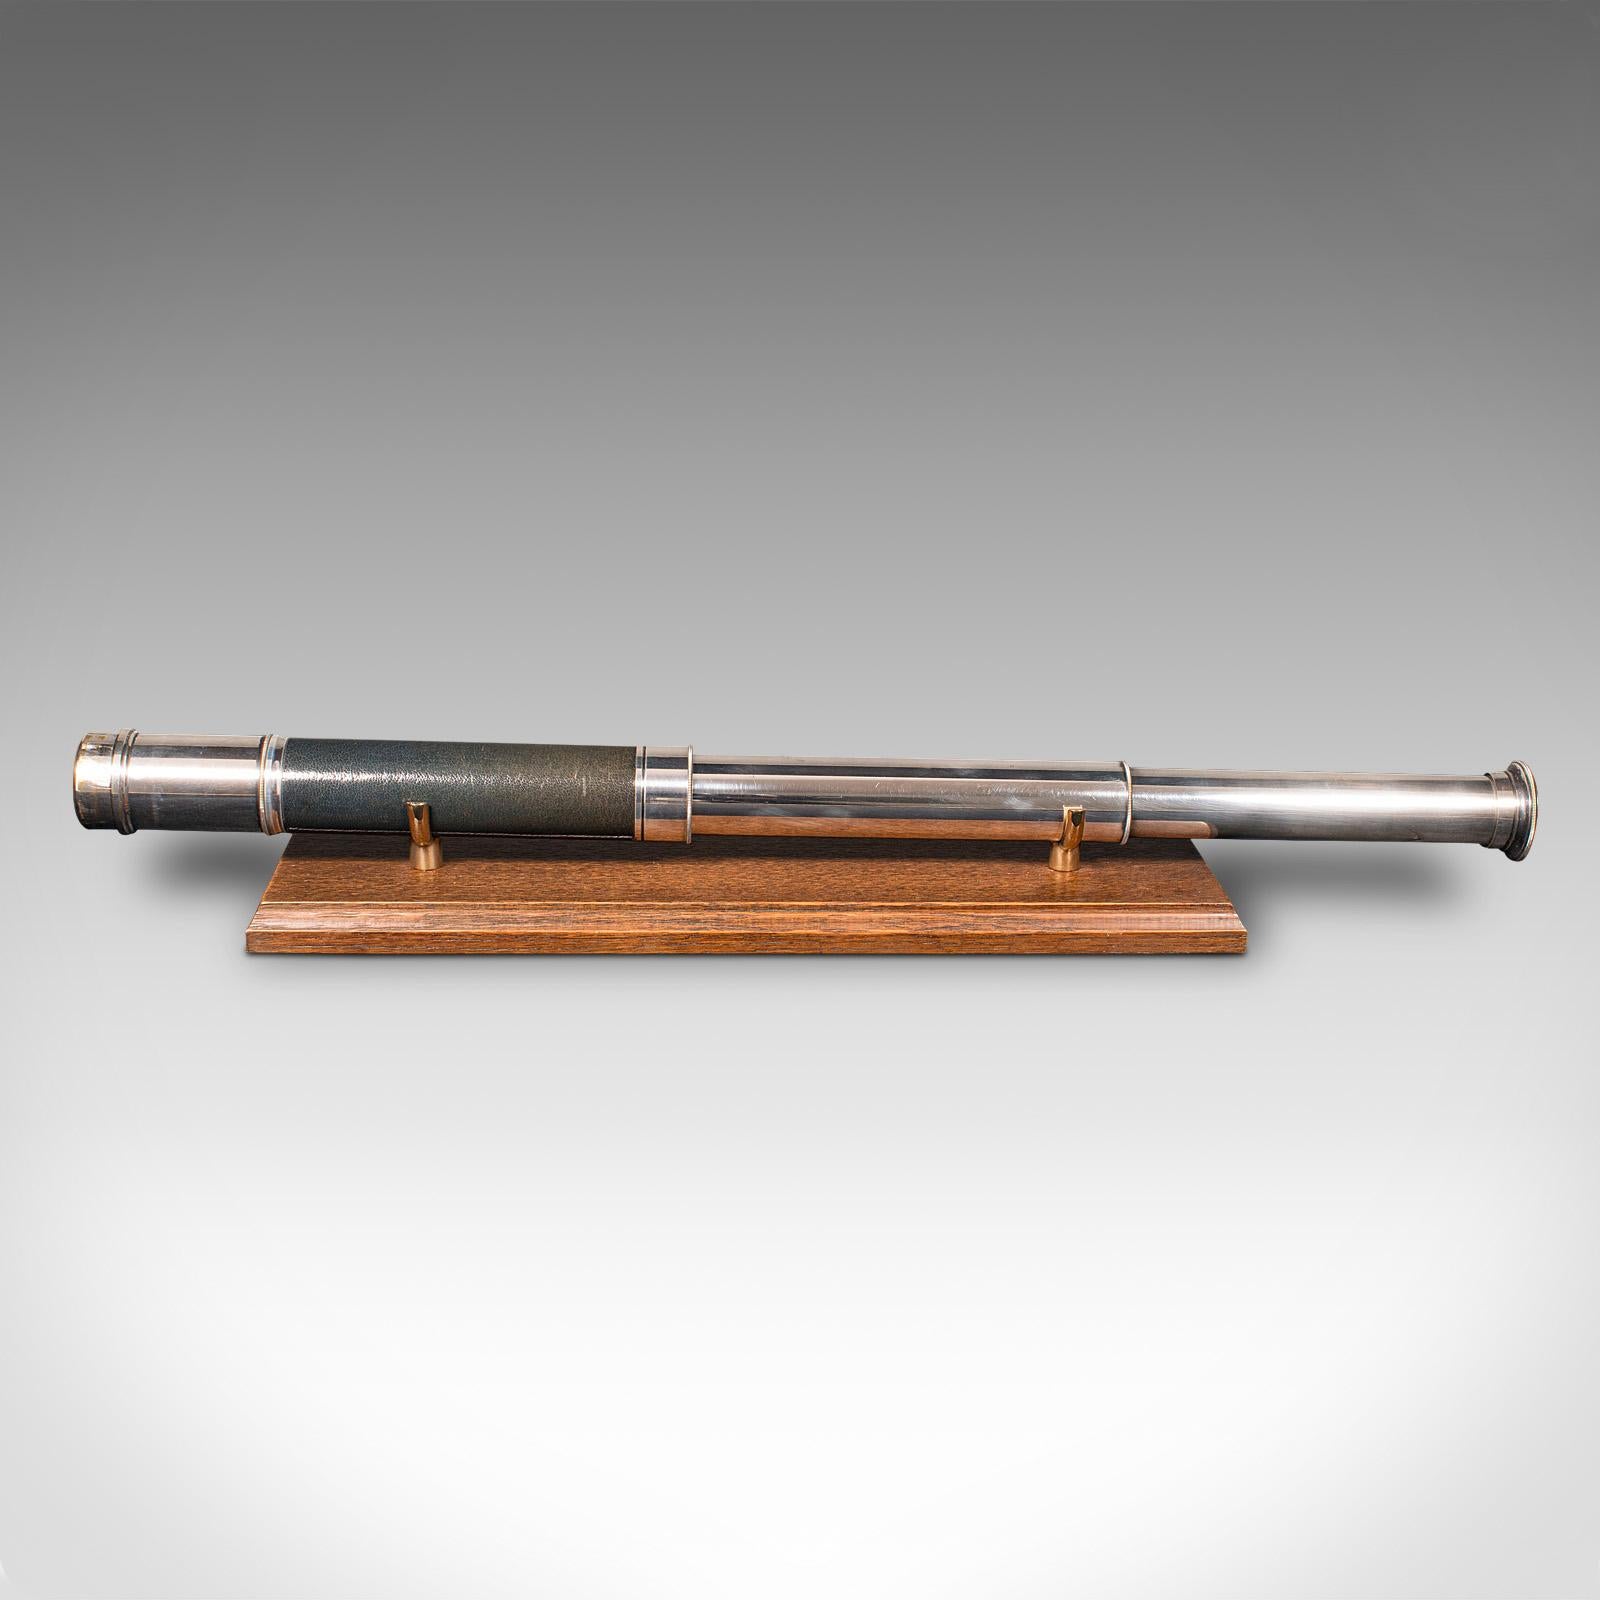 
This is an antique 2 draw telescope. An English, chromed brass terrestrial or astronomical refractor, dating to the late Victorian period, circa 1900.

Perfect for bird watching, landscape appreciation, wildlife, or maritime observation. Equally